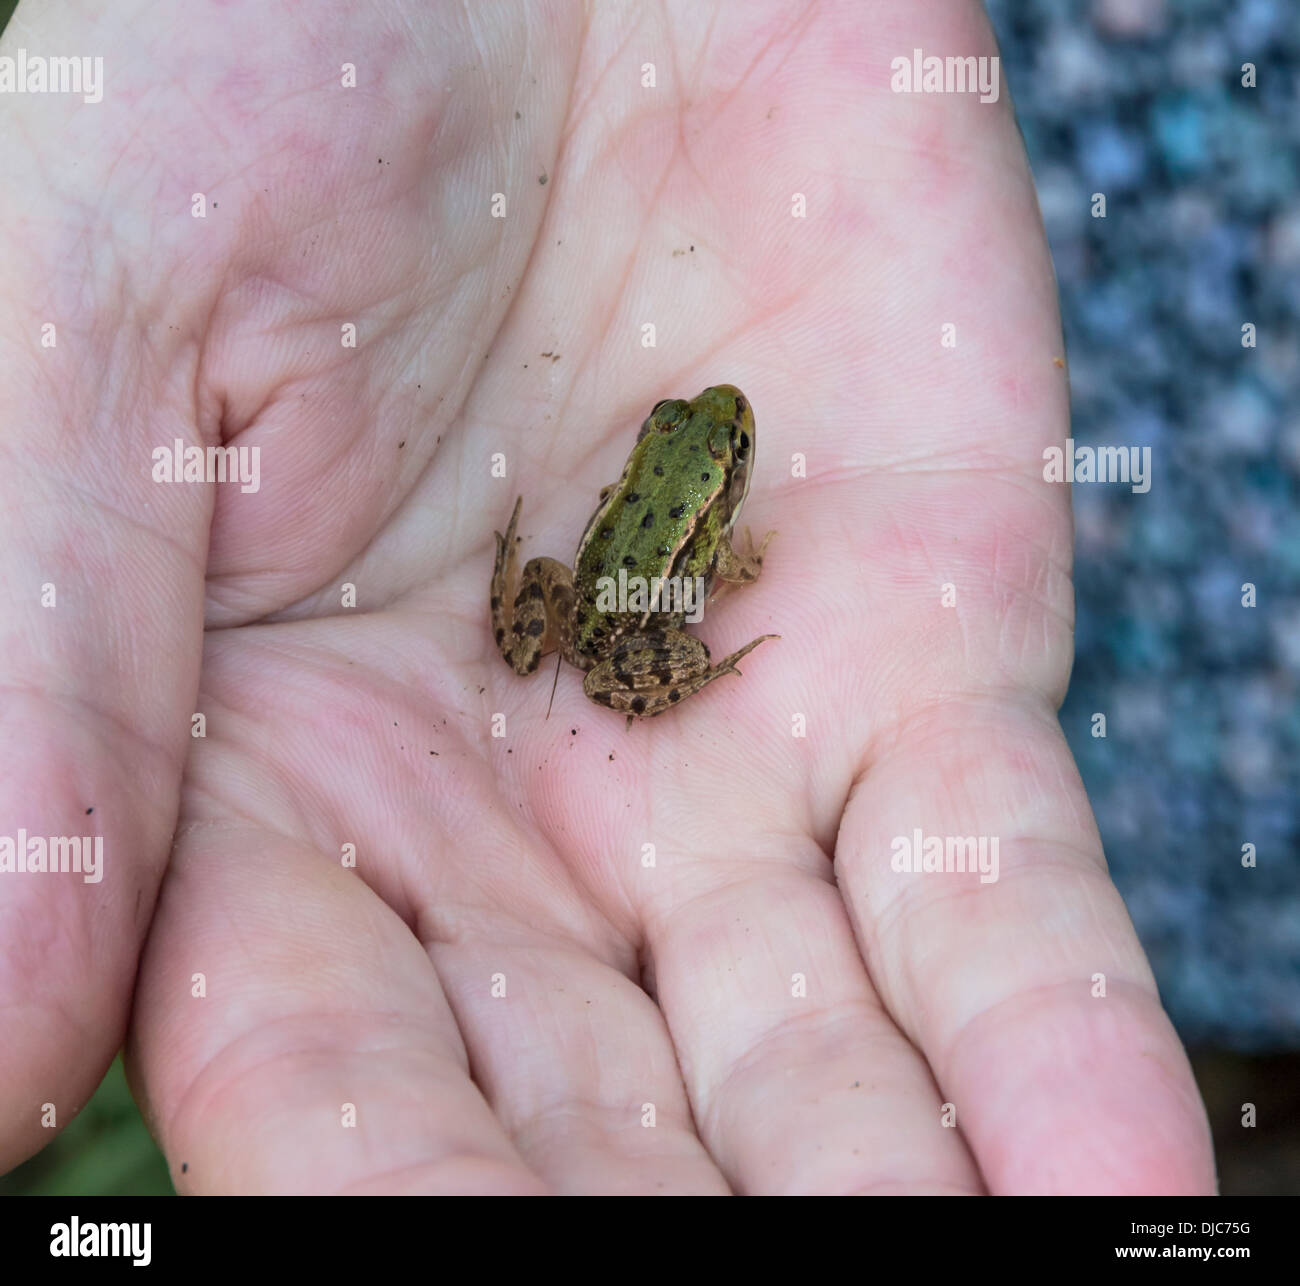 https://c8.alamy.com/comp/DJC75G/litttle-baby-frog-sits-in-the-middle-of-human-palm-DJC75G.jpg